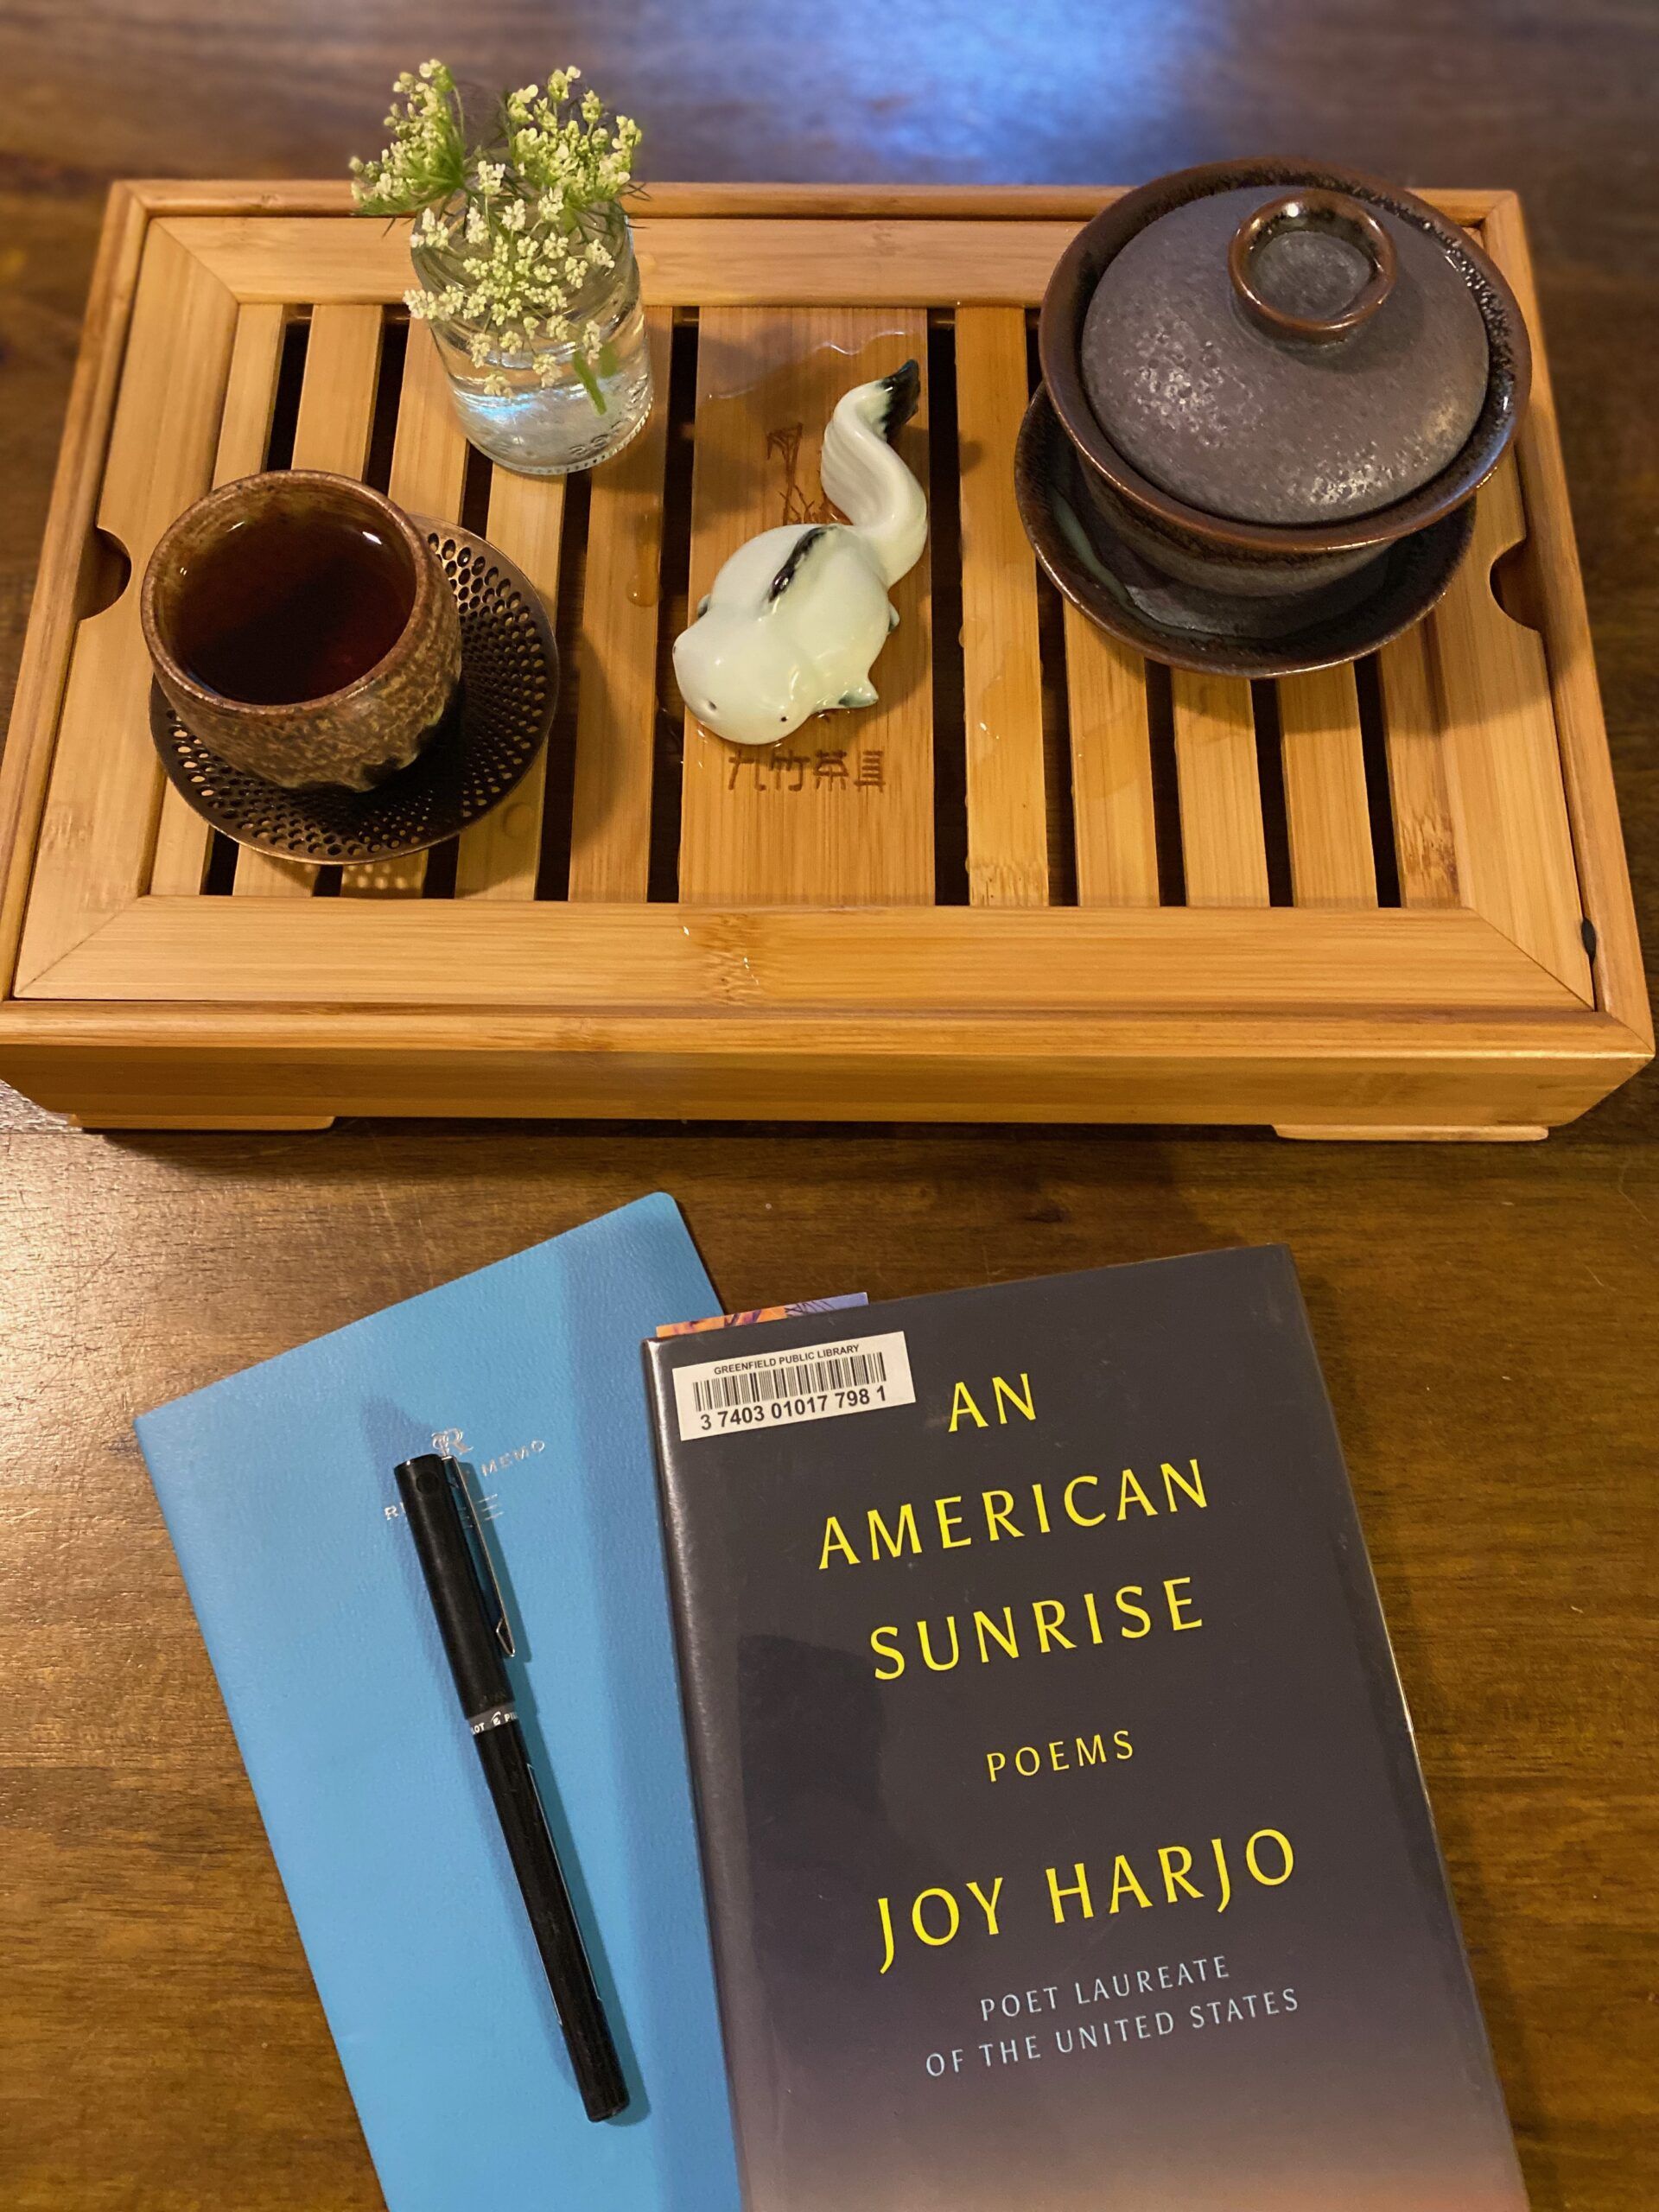 A tea setup on a wooden tray with open slats: a small ceramic mug on a metal coaster, a goldfish tea friend, a small jar of Queen Ann's lace, and a small Gaiwan teapot. A blue notebook and An American Sunrise by Joy Harjo sit on the table in front of the teaware. Photo by me.